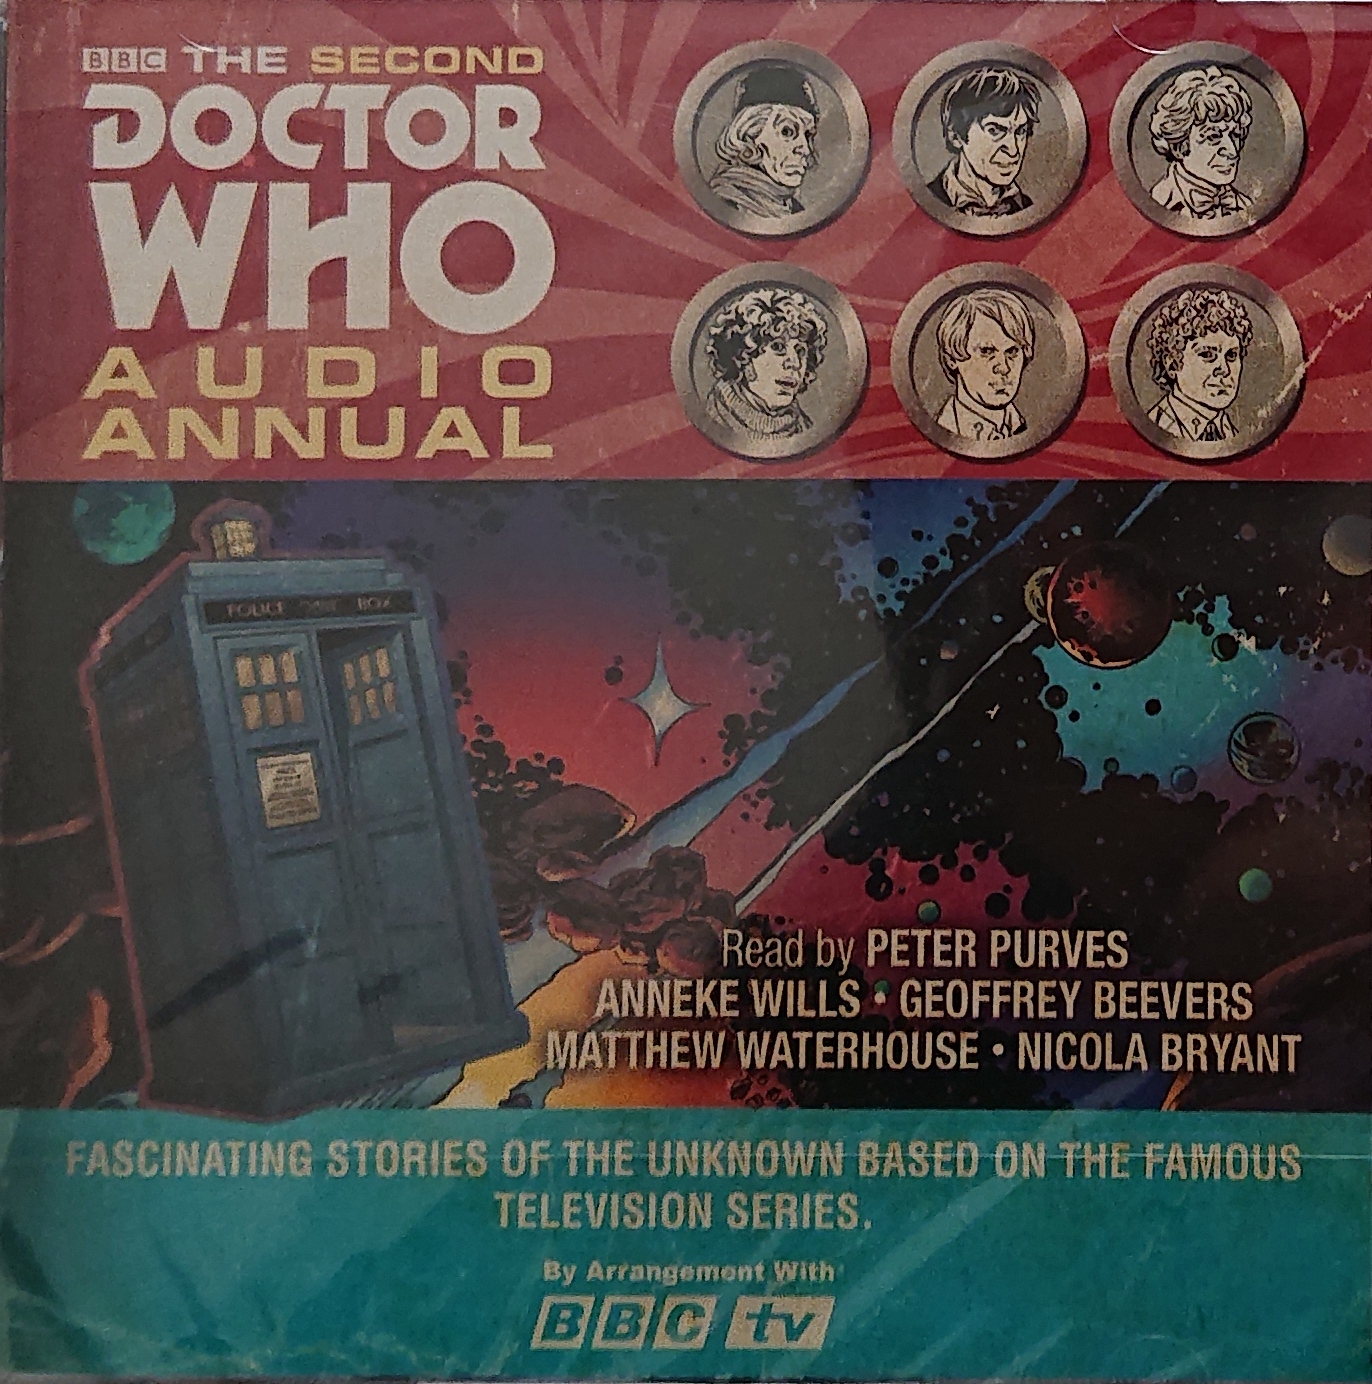 Picture of ISBN 978-1-78529-983-4 Doctor Who - Audio annual by artist Various from the BBC records and Tapes library